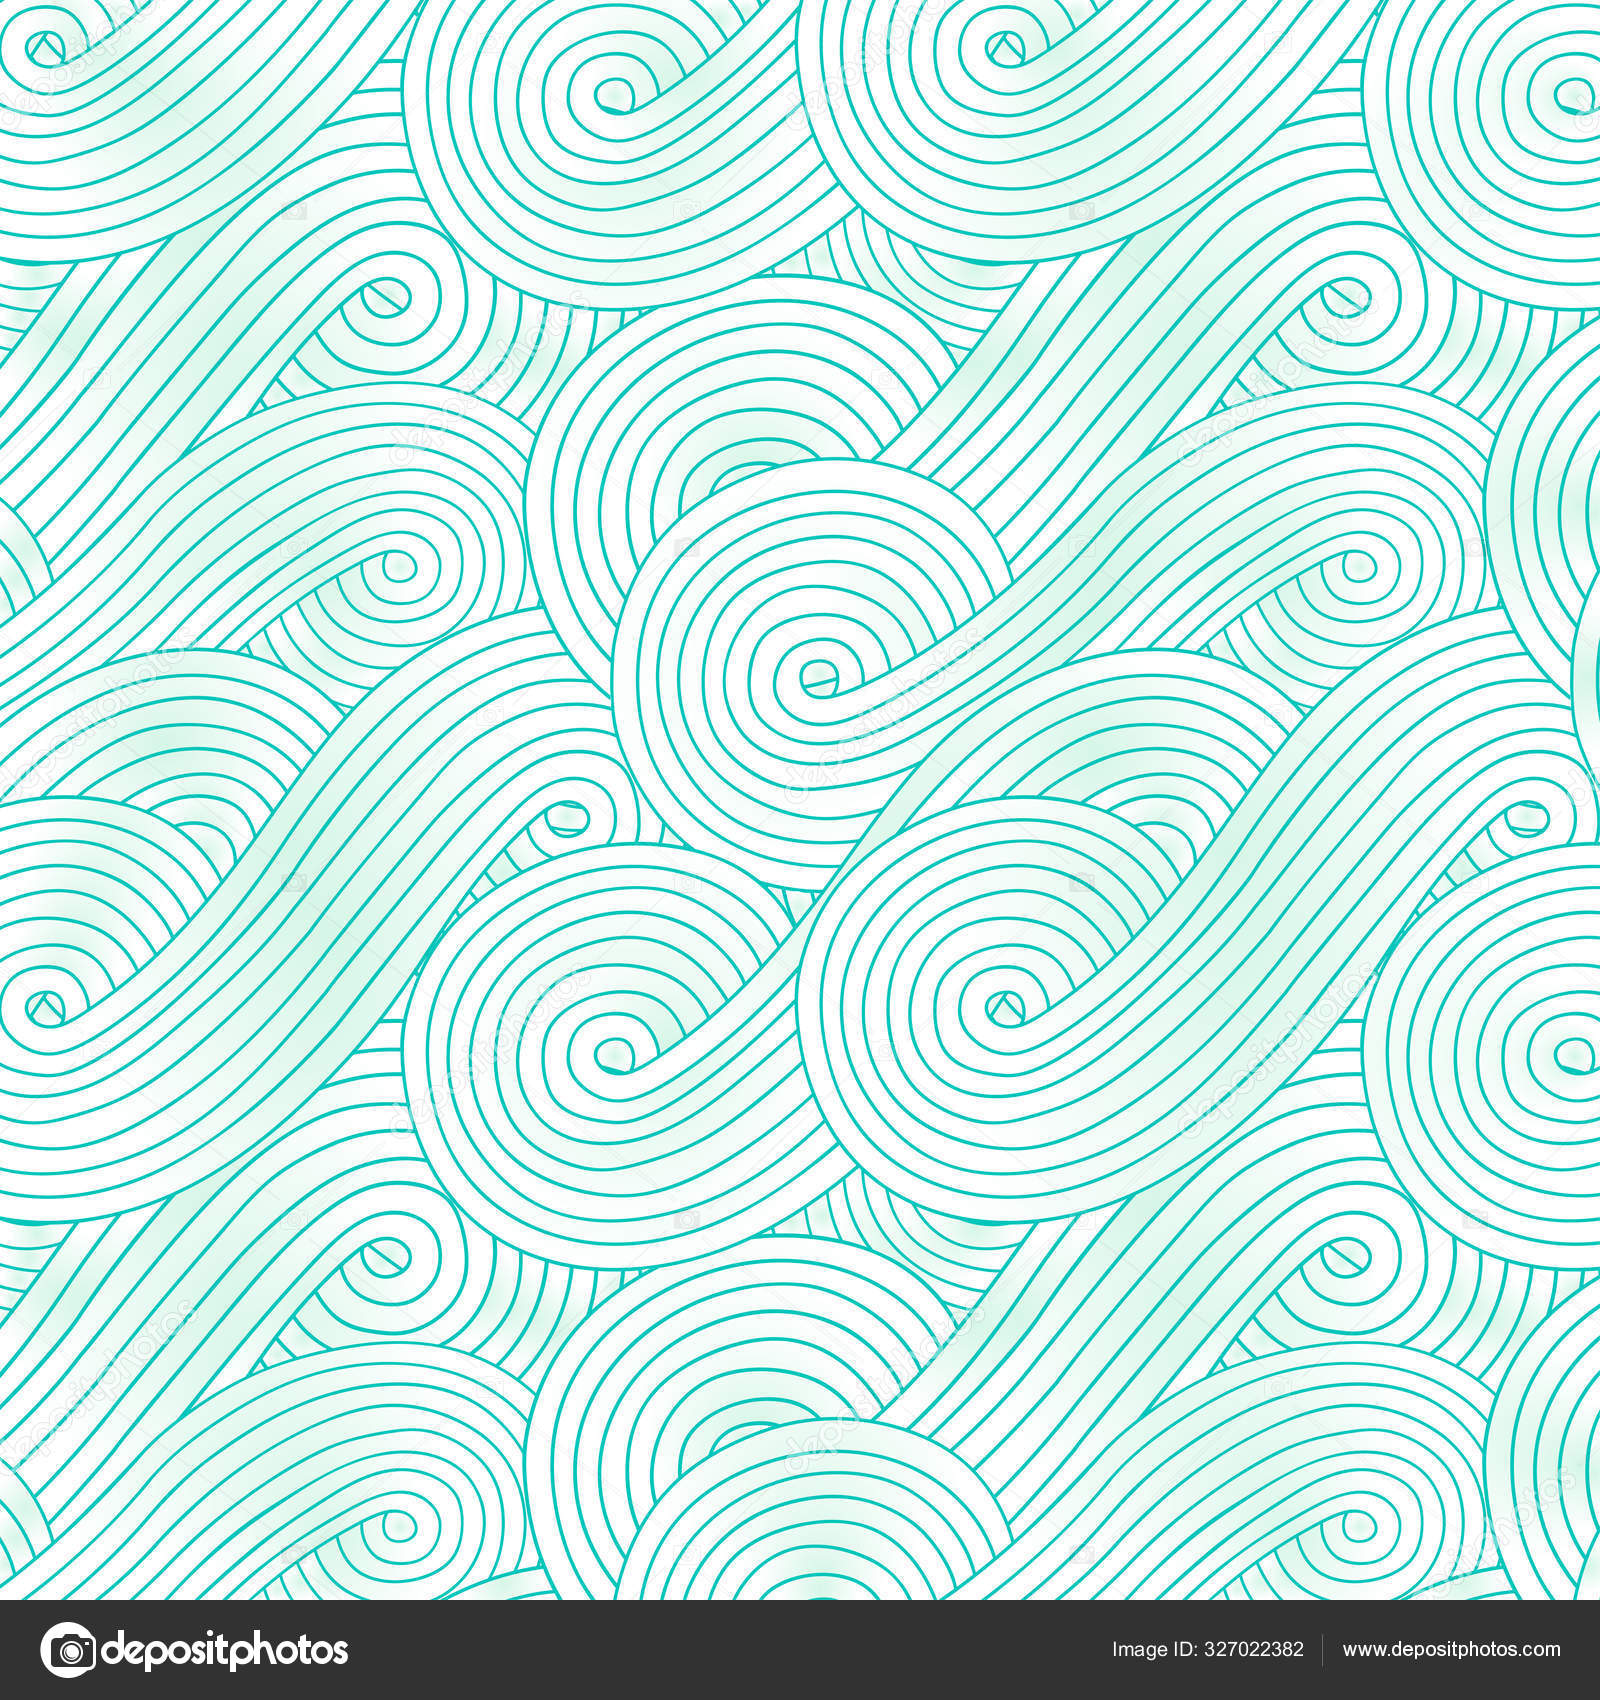 Abstract Vector Wave Background Doodle Hand Drawn Lines Colorful Floral ...